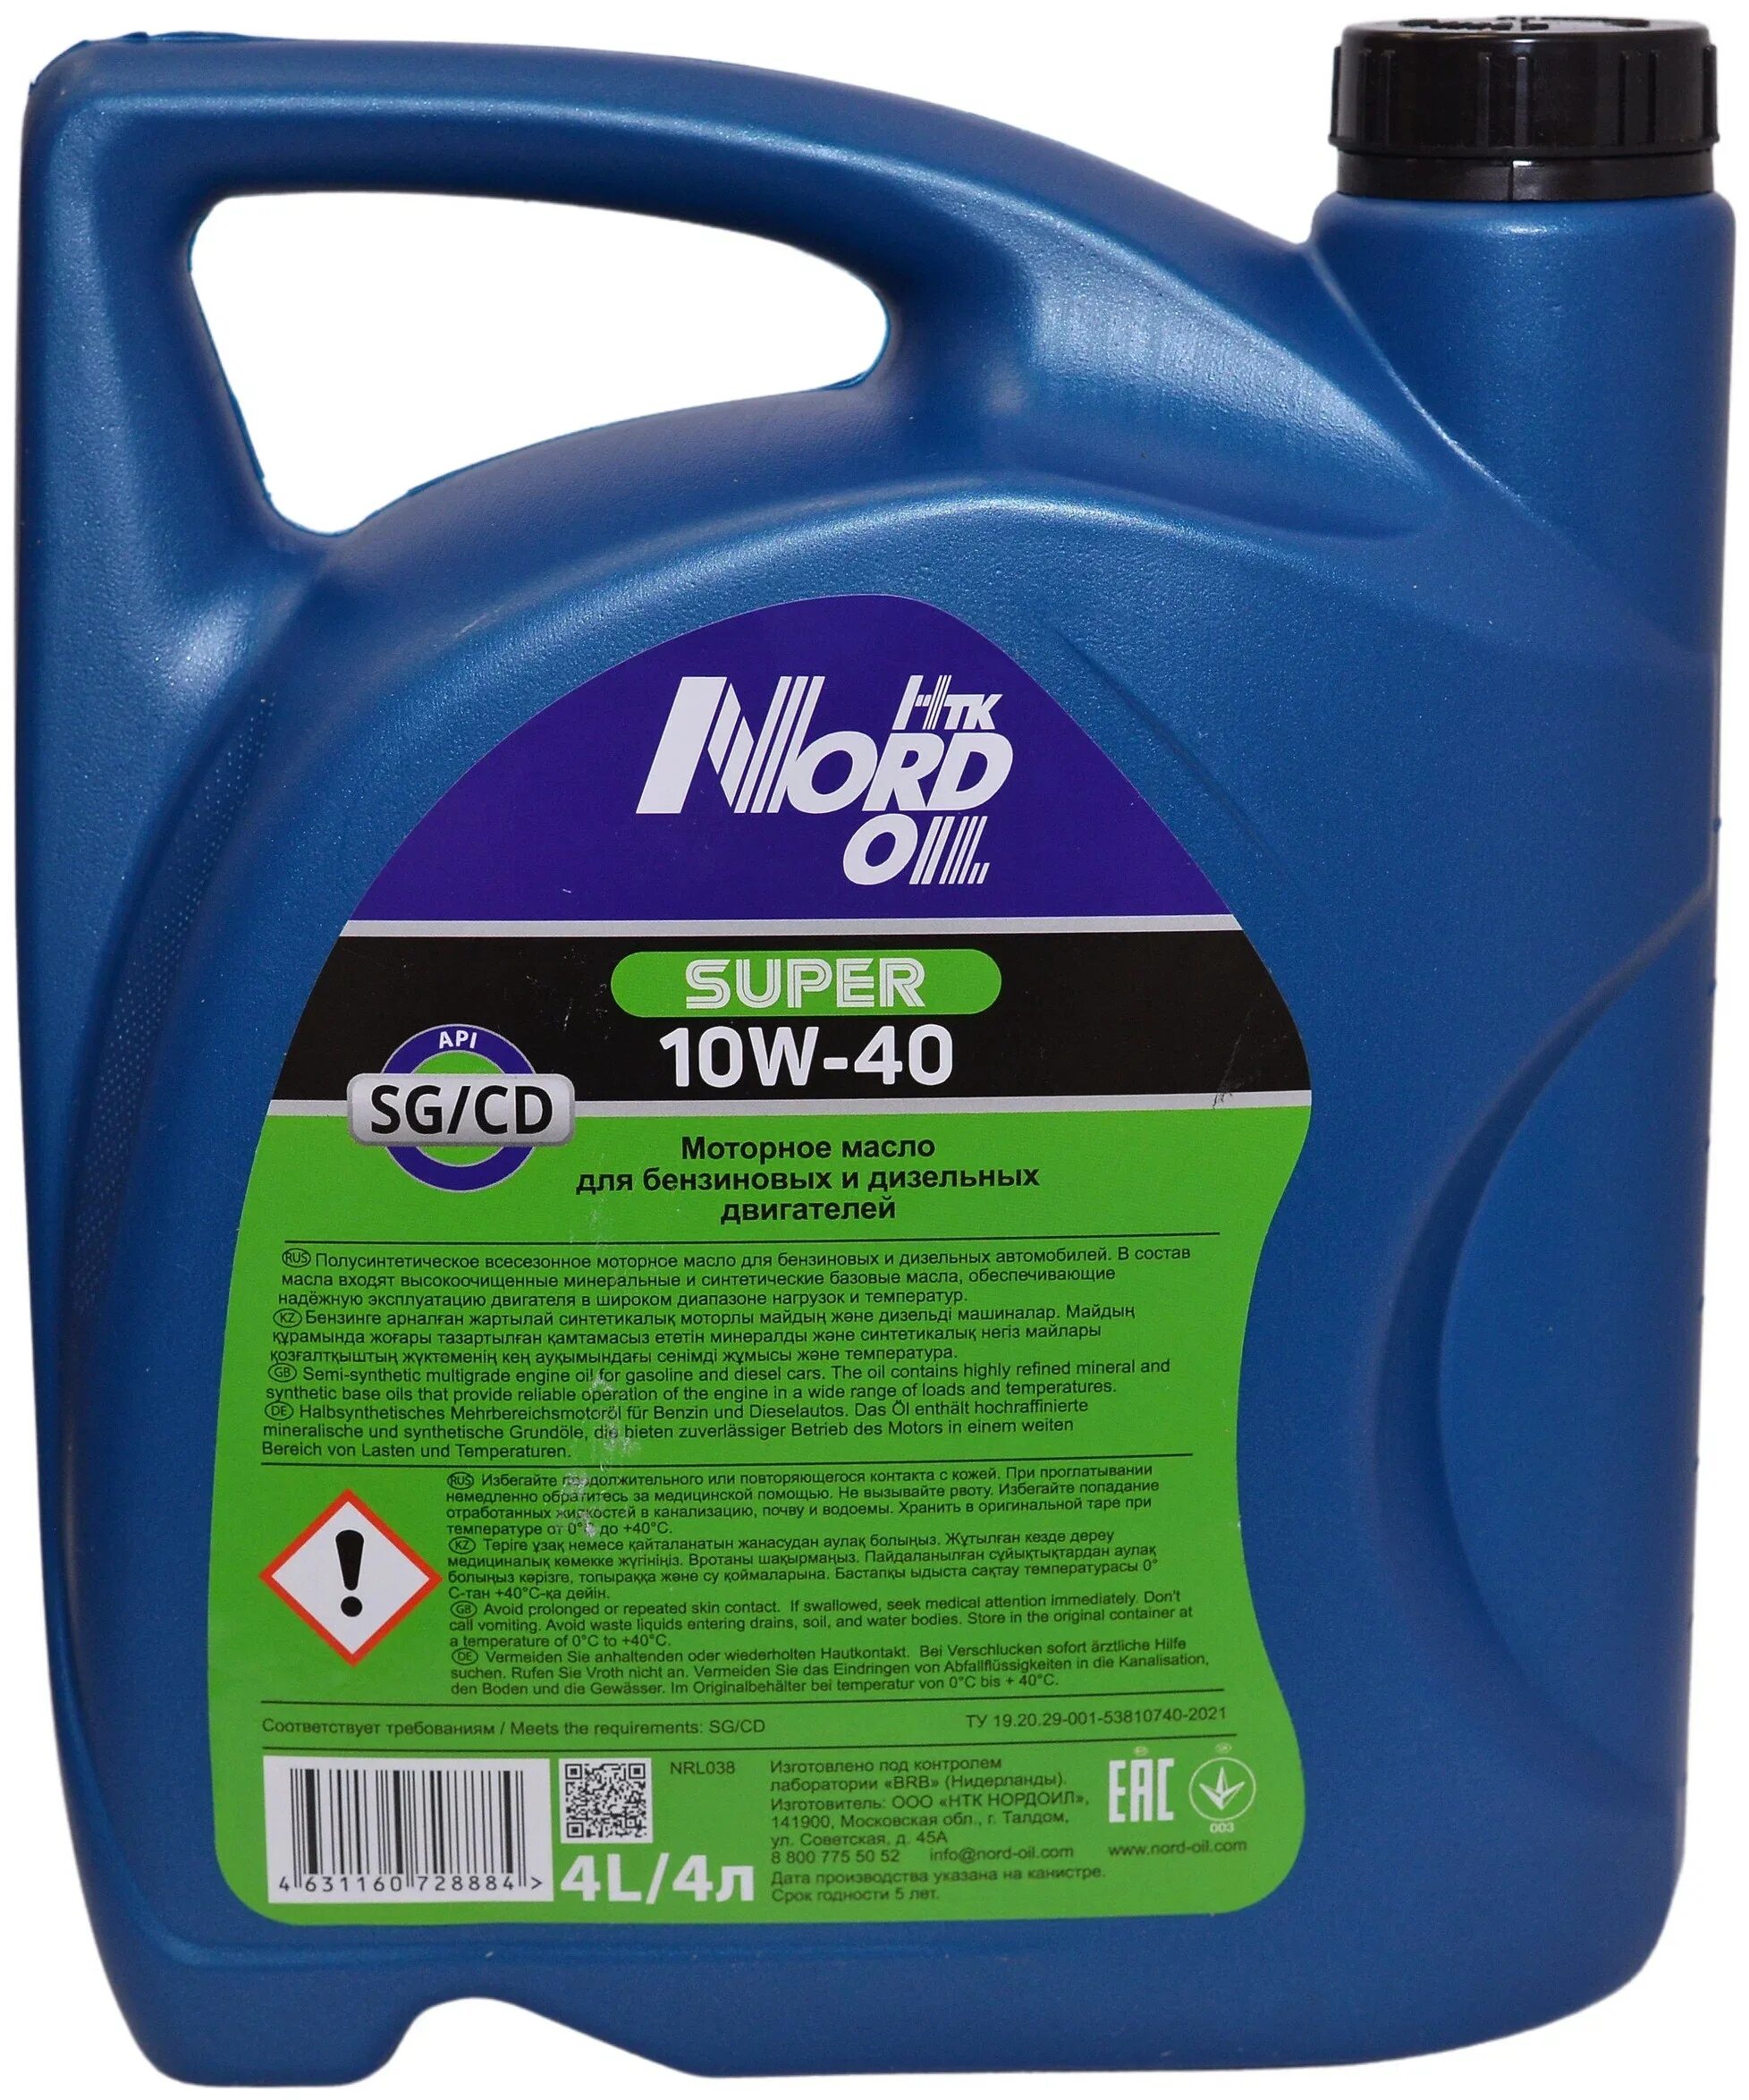 Масло моторное 30 или 40. Nord Oil 10w-40. Масло Nord Oil 10 40. Nord Oil nrl038 масло моторное Nord Oil super 10w-4. Nrl038 Nord Oil масло Nord Oil super 10w-40 SG/CD 4л.